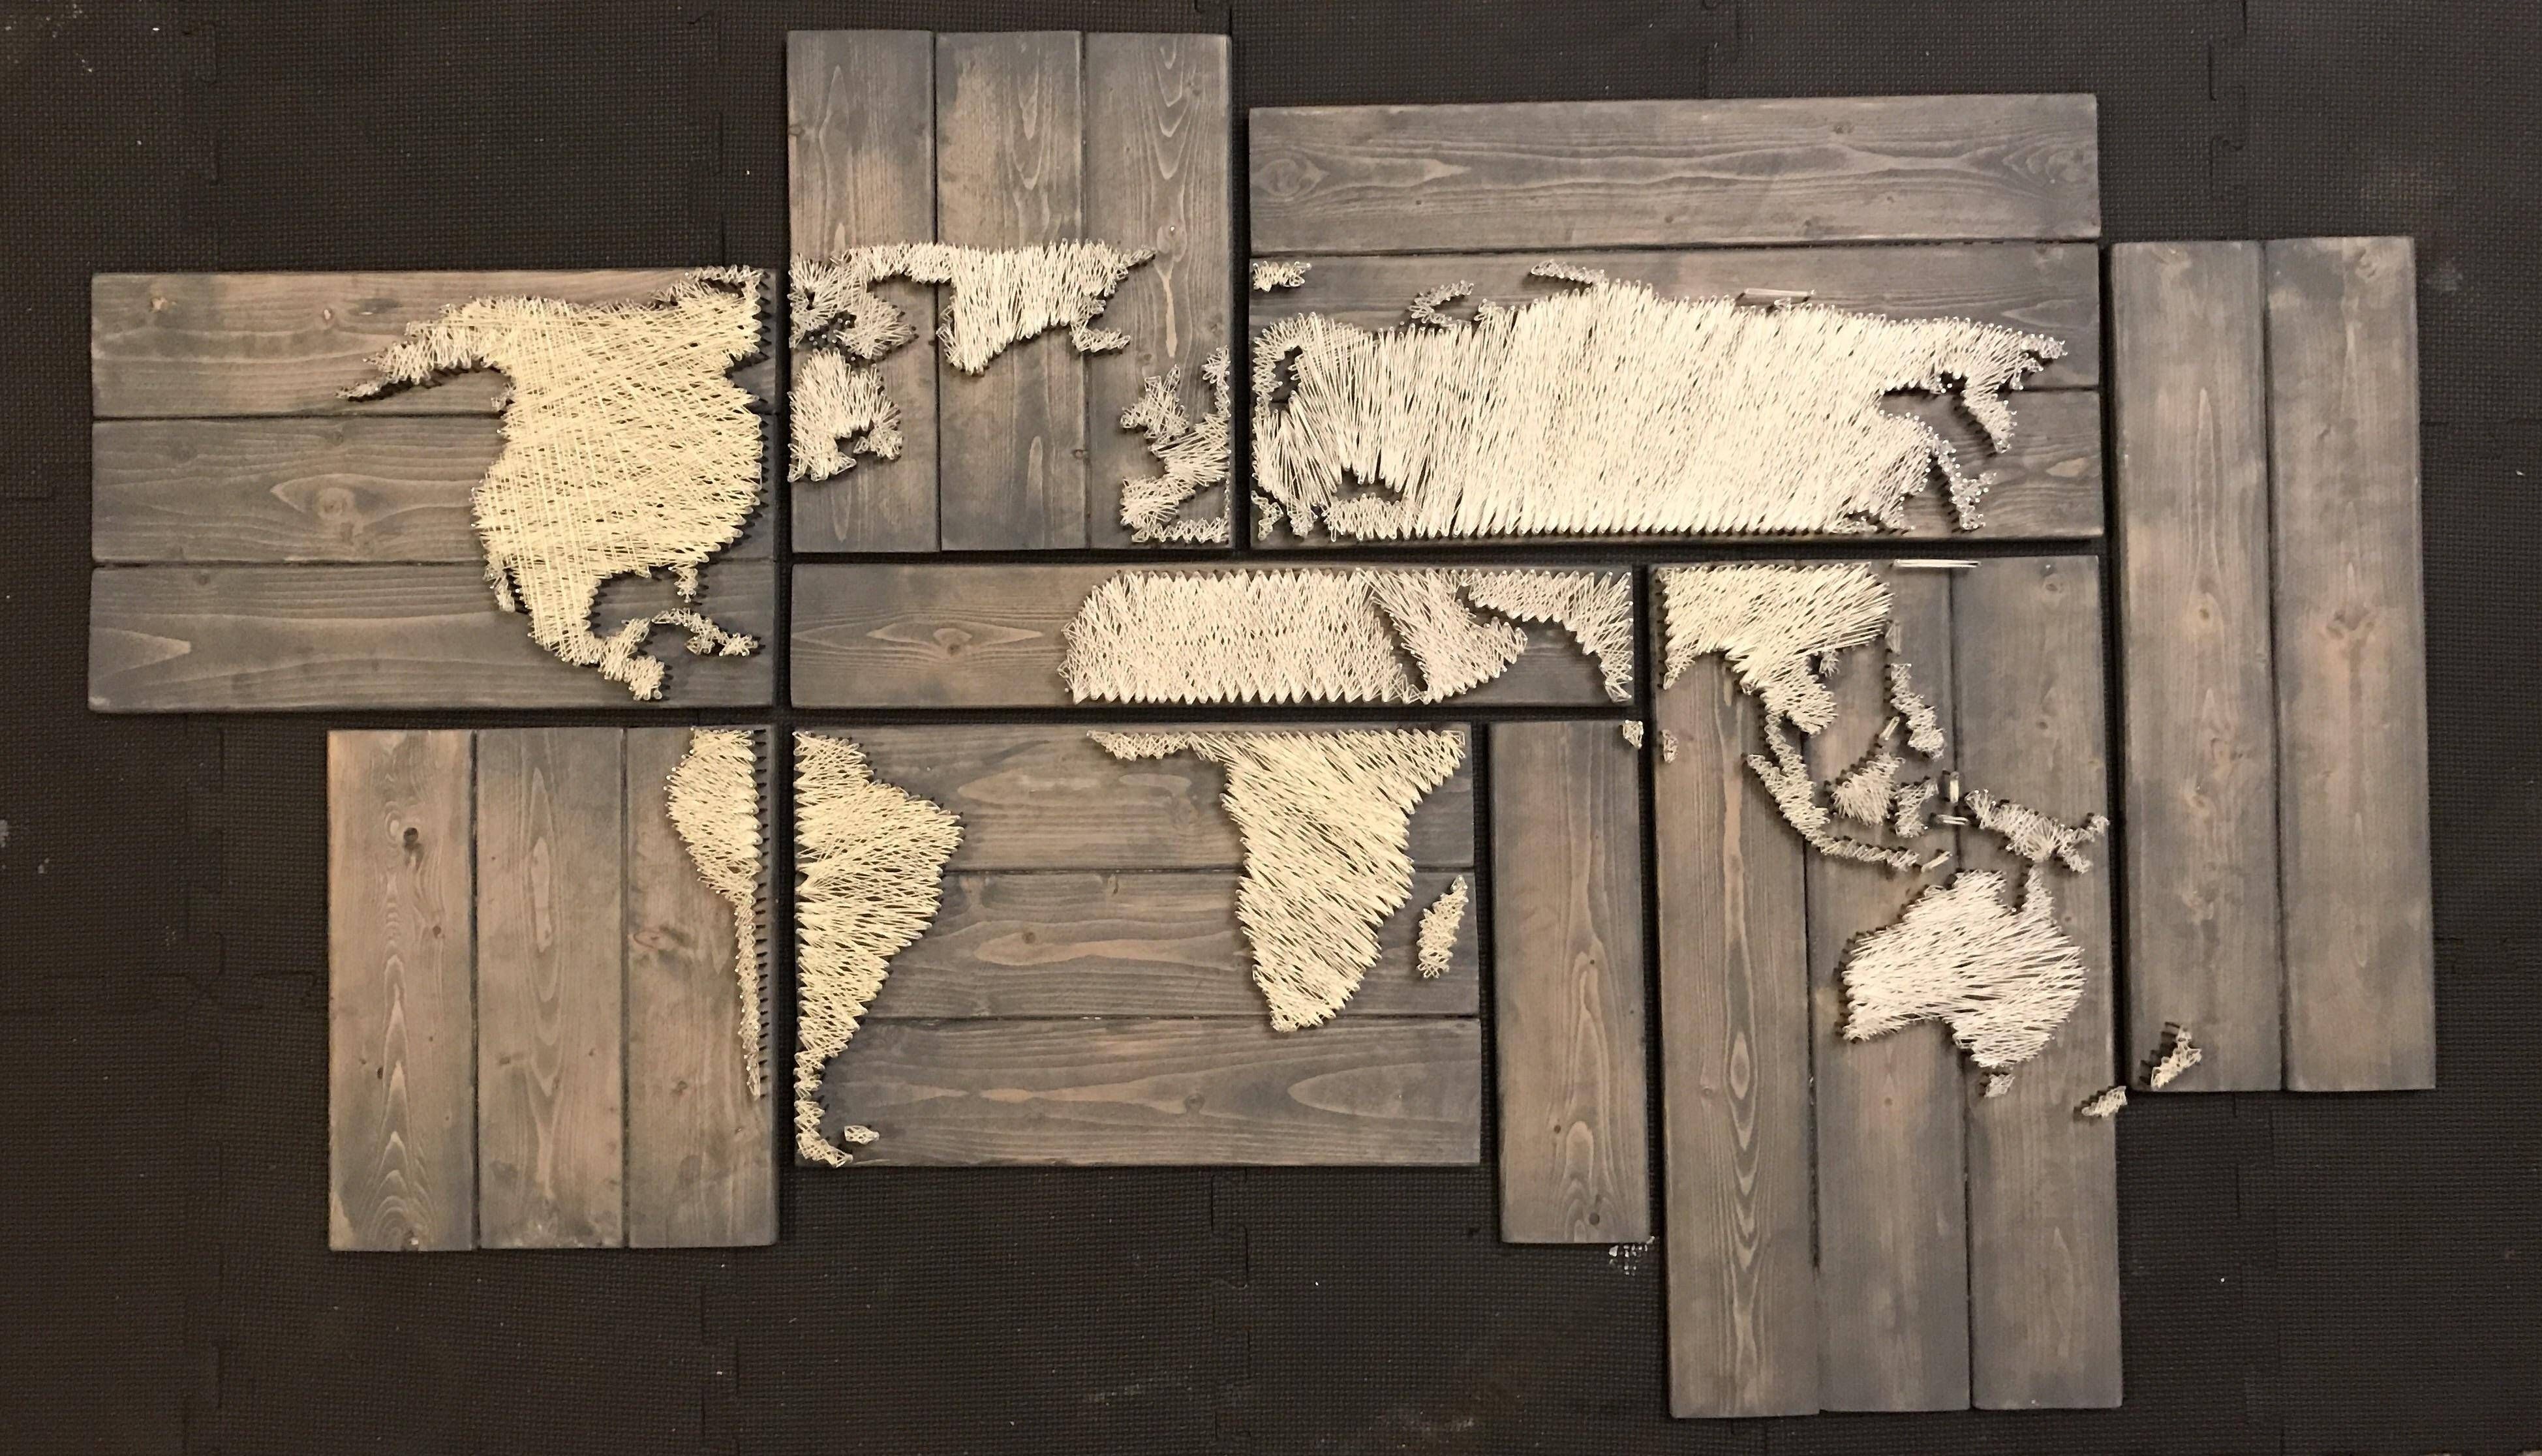 With Over 1,000 Nails And 400 Yards Of String, My World String Art Intended For Current String Map Wall Art (View 13 of 20)